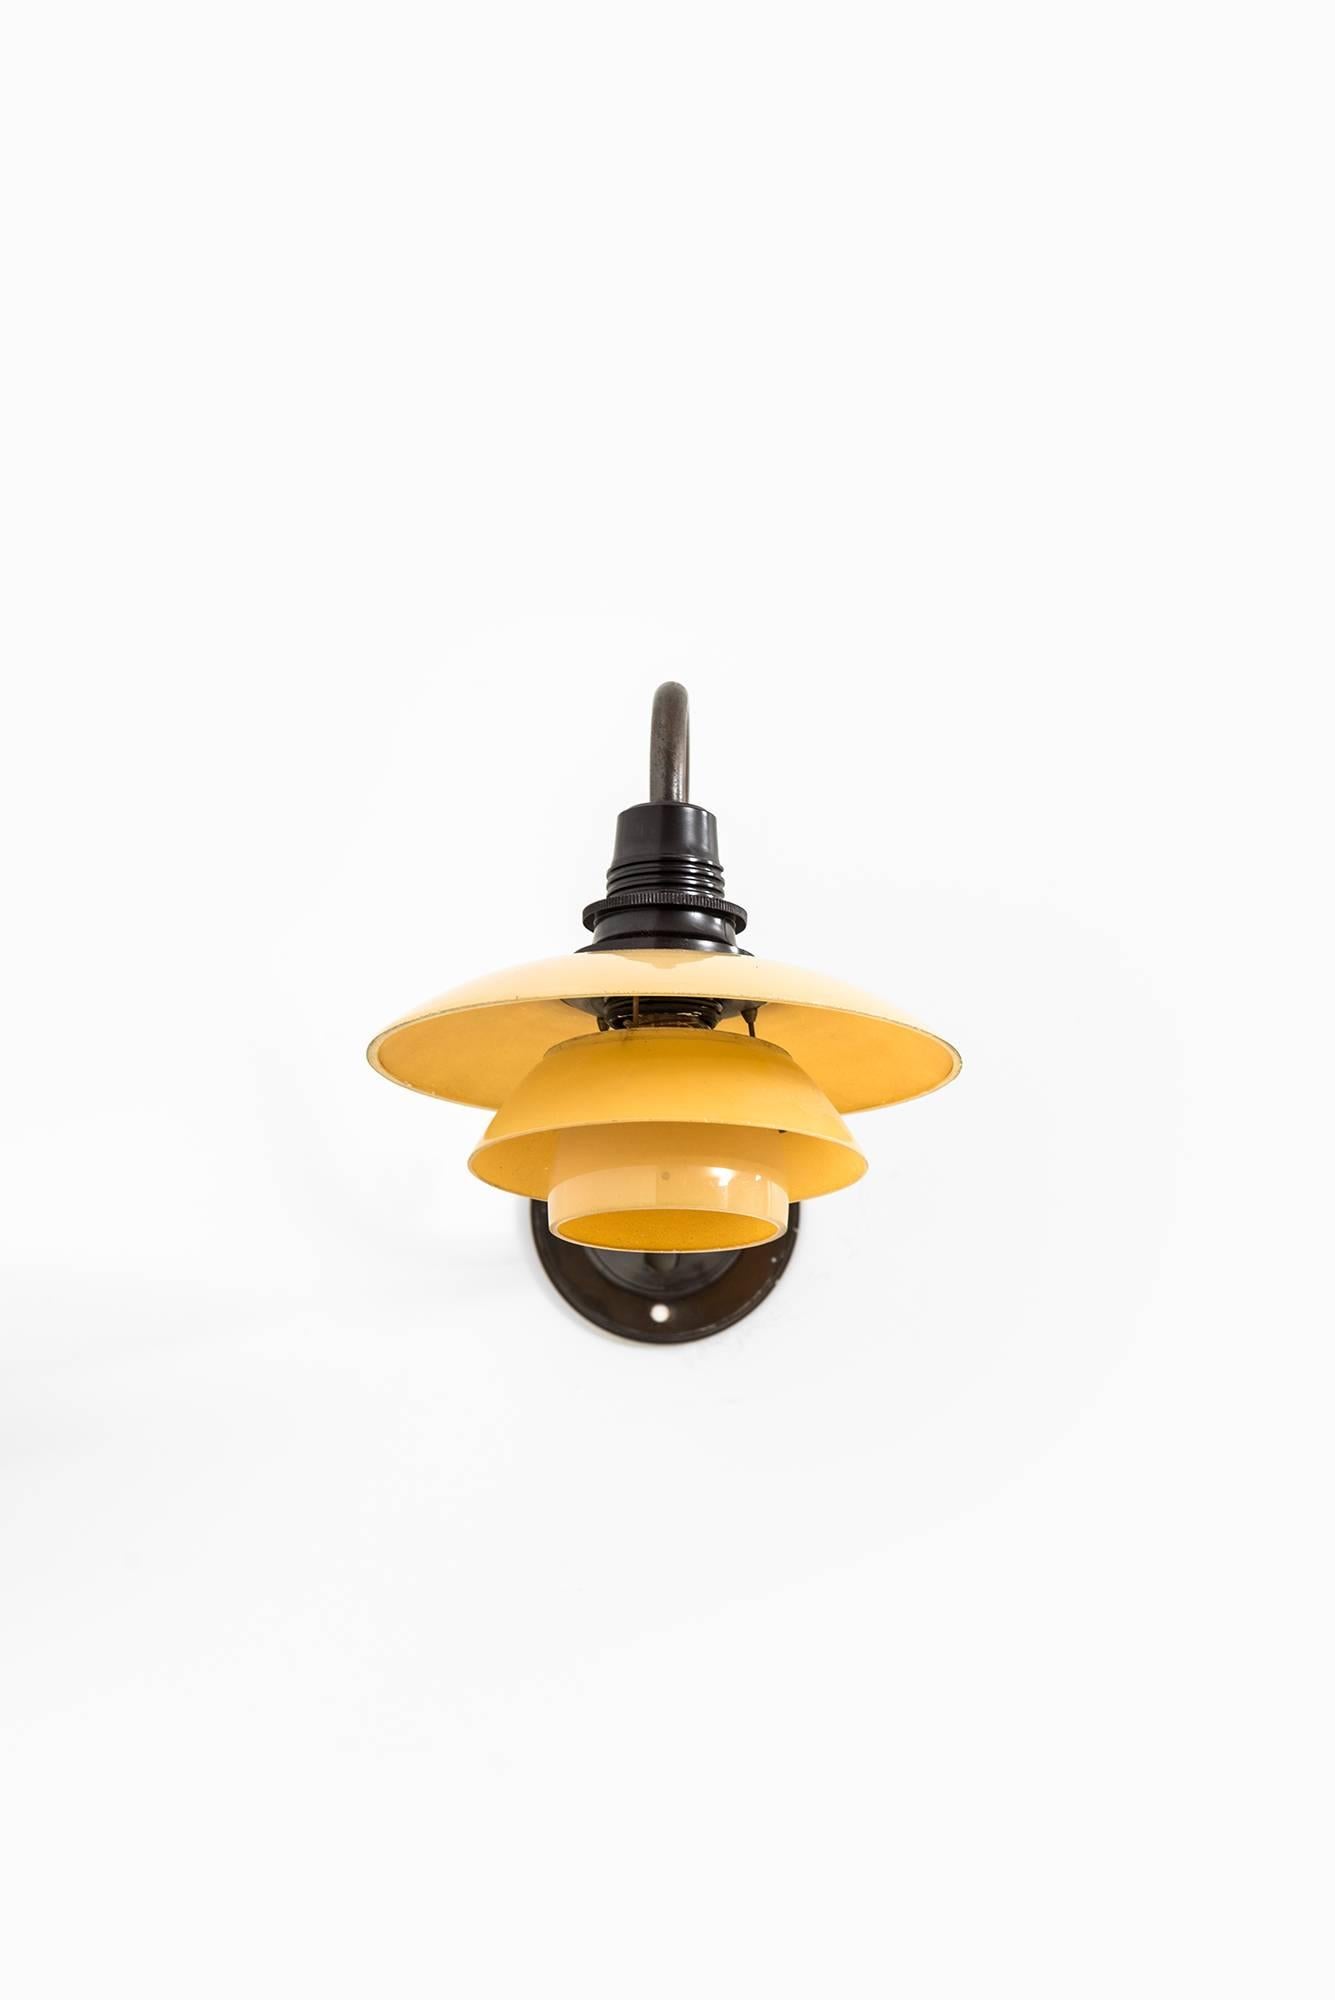 Rare wall lamp model PH-1 designed by Poul Henningsen. Produced by Louis Poulsen in Denmark.